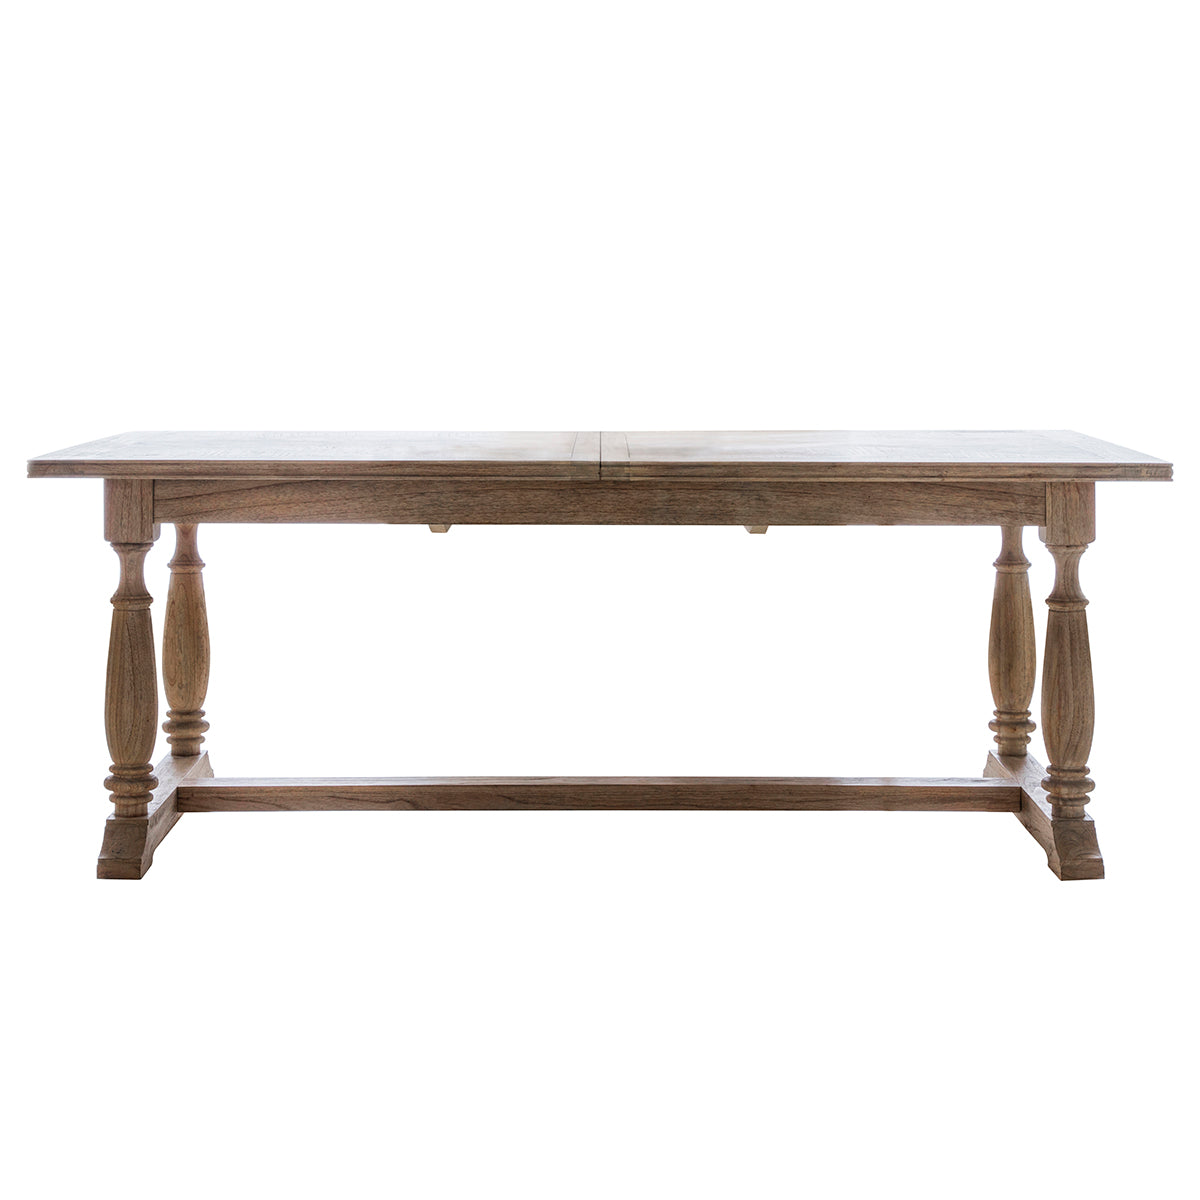 A Belsford Extending Dining Table with a wooden top from Kikiathome.co.uk, perfect for interior decor and home furniture.